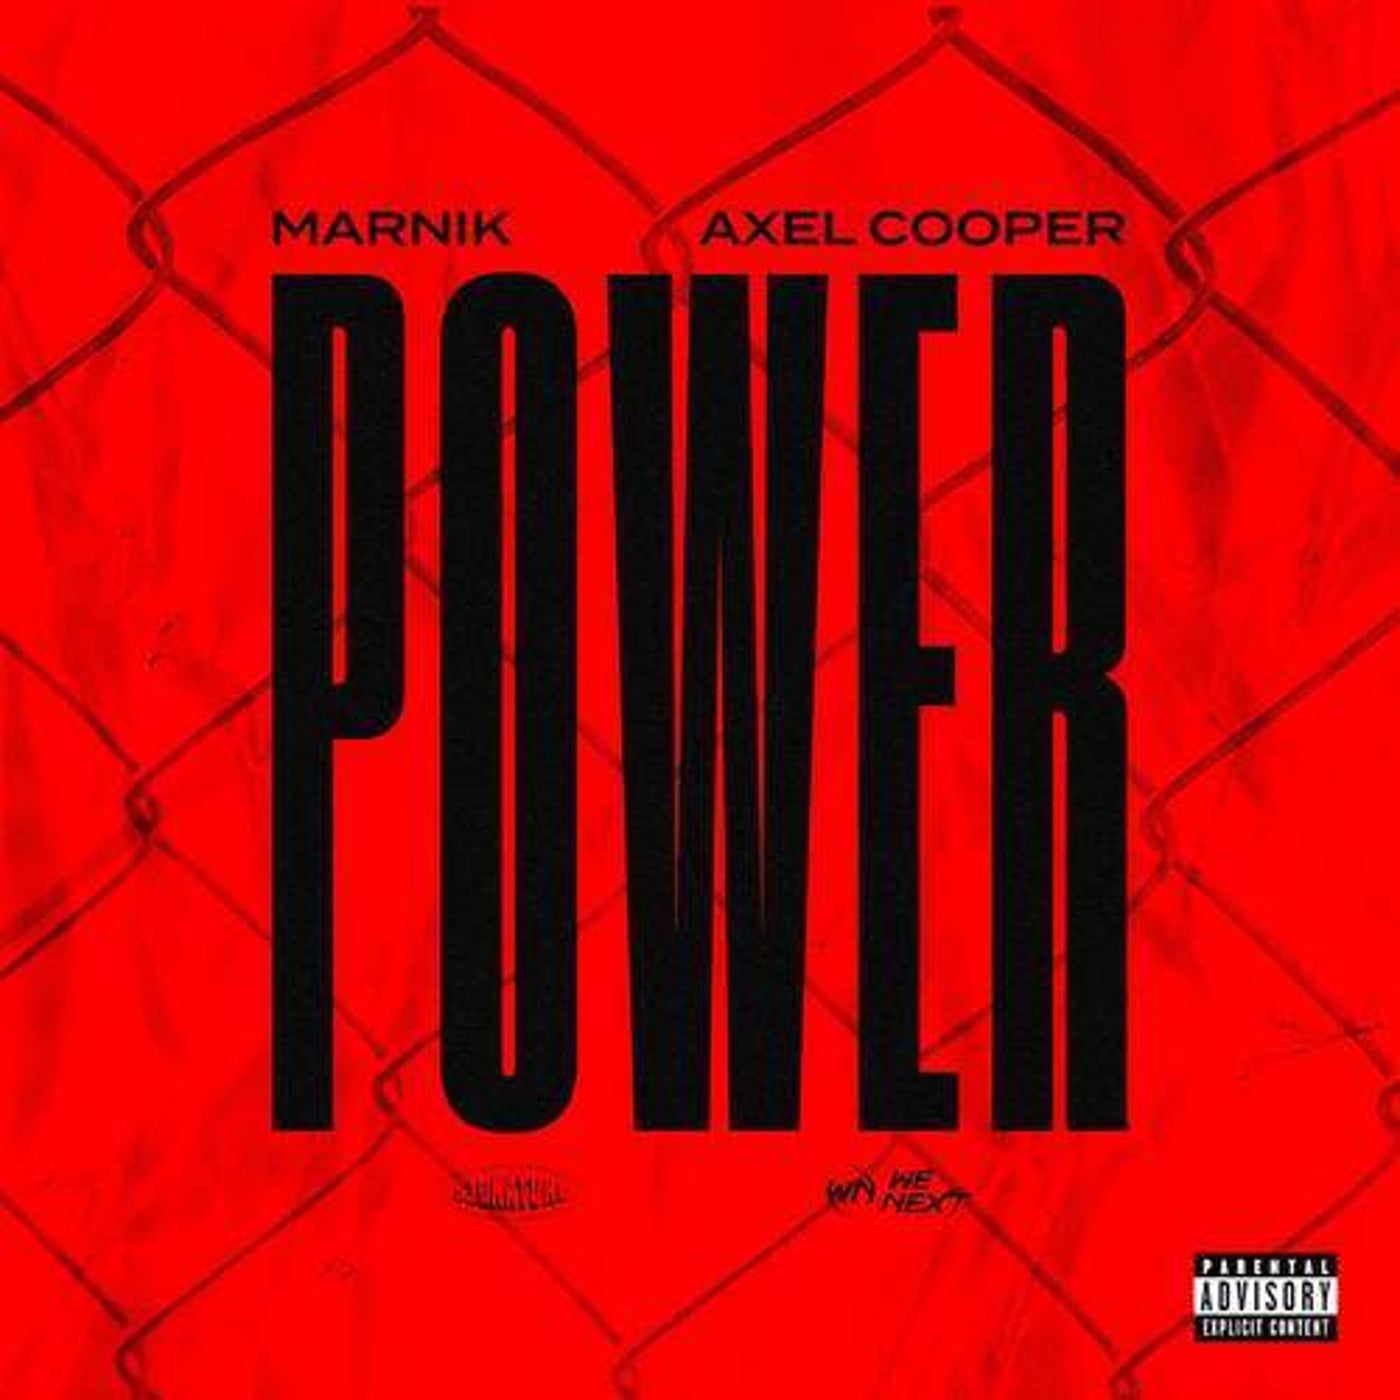 POWER (Extended Version)